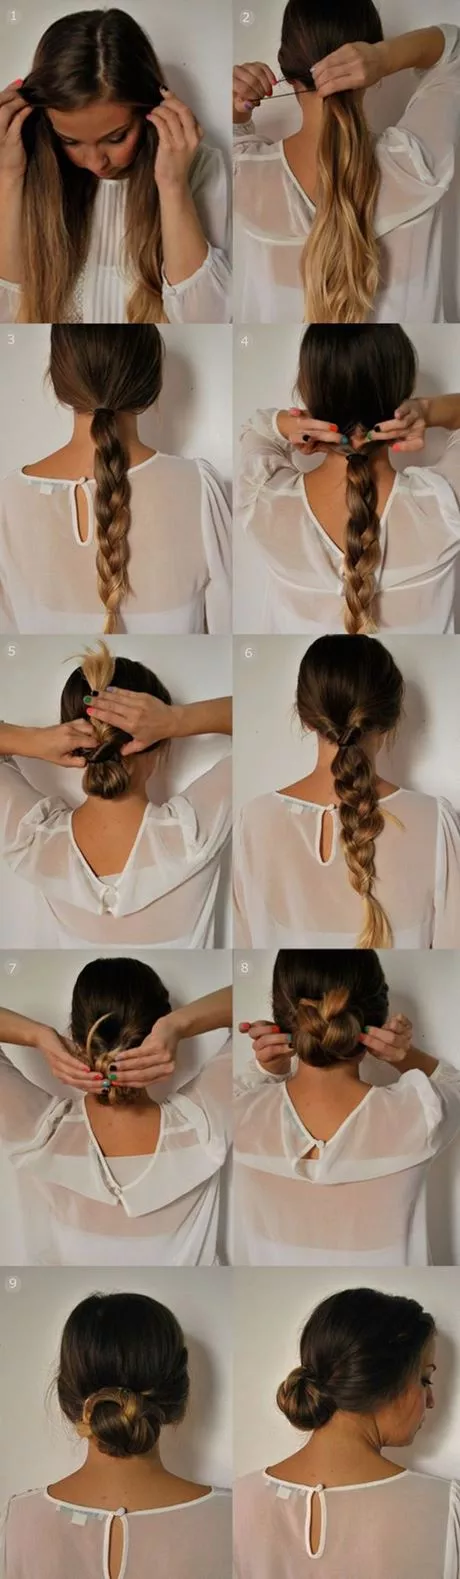 Cool easy hairstyles for girls cool-easy-hairstyles-for-girls-16_13-4-4